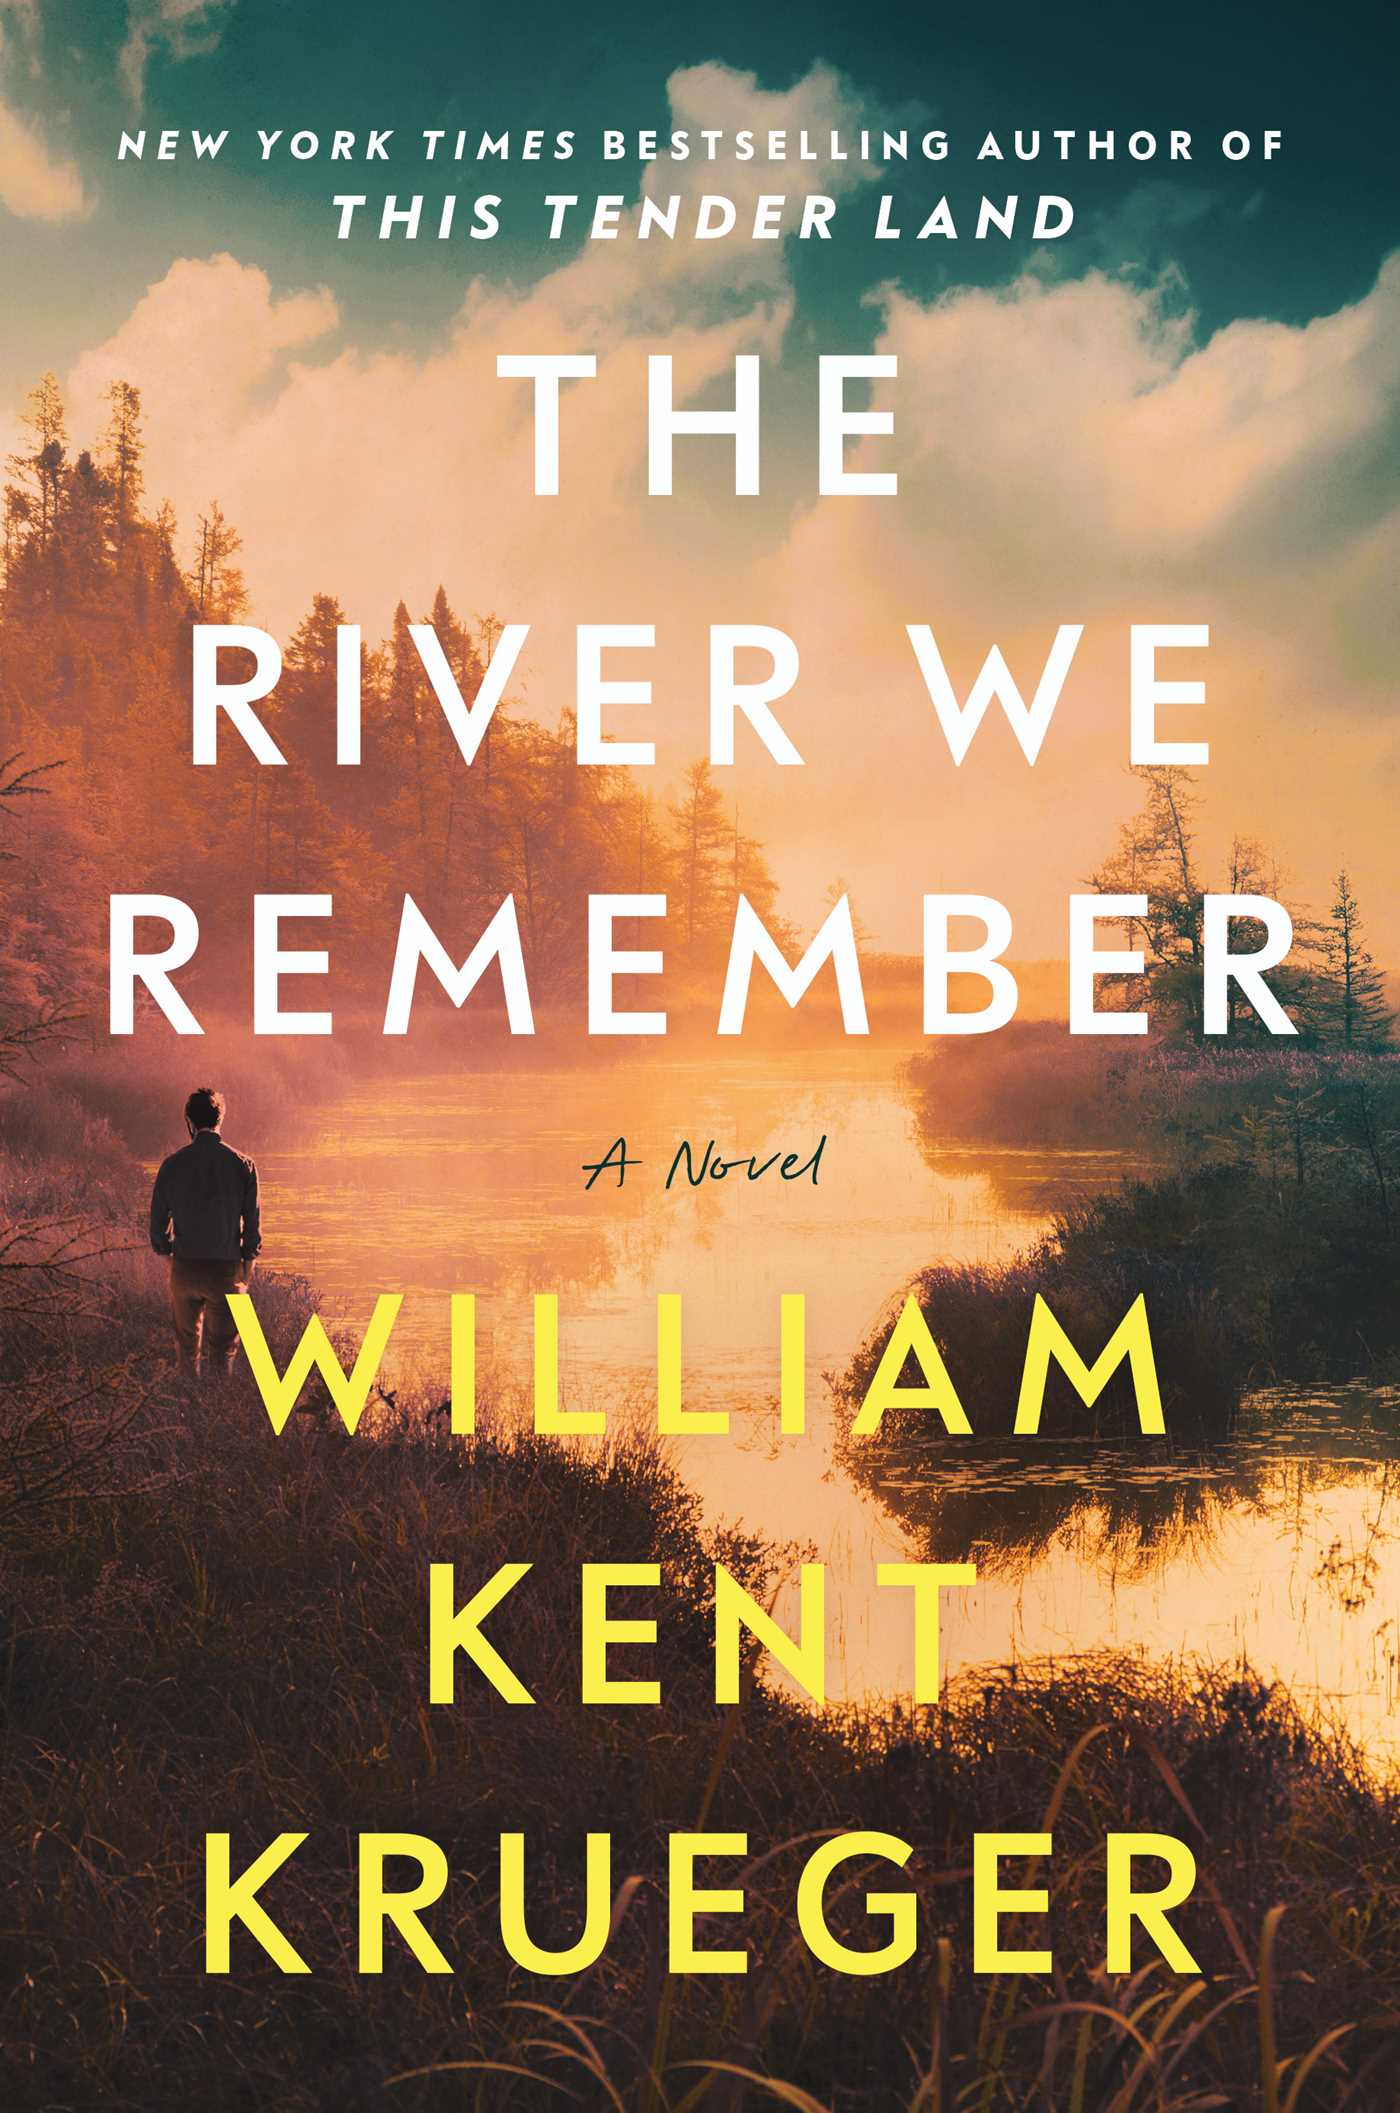 sunset clouds in the background with the title "The River We Rember" in white lettering and "William Kent Krueger" in yellow.